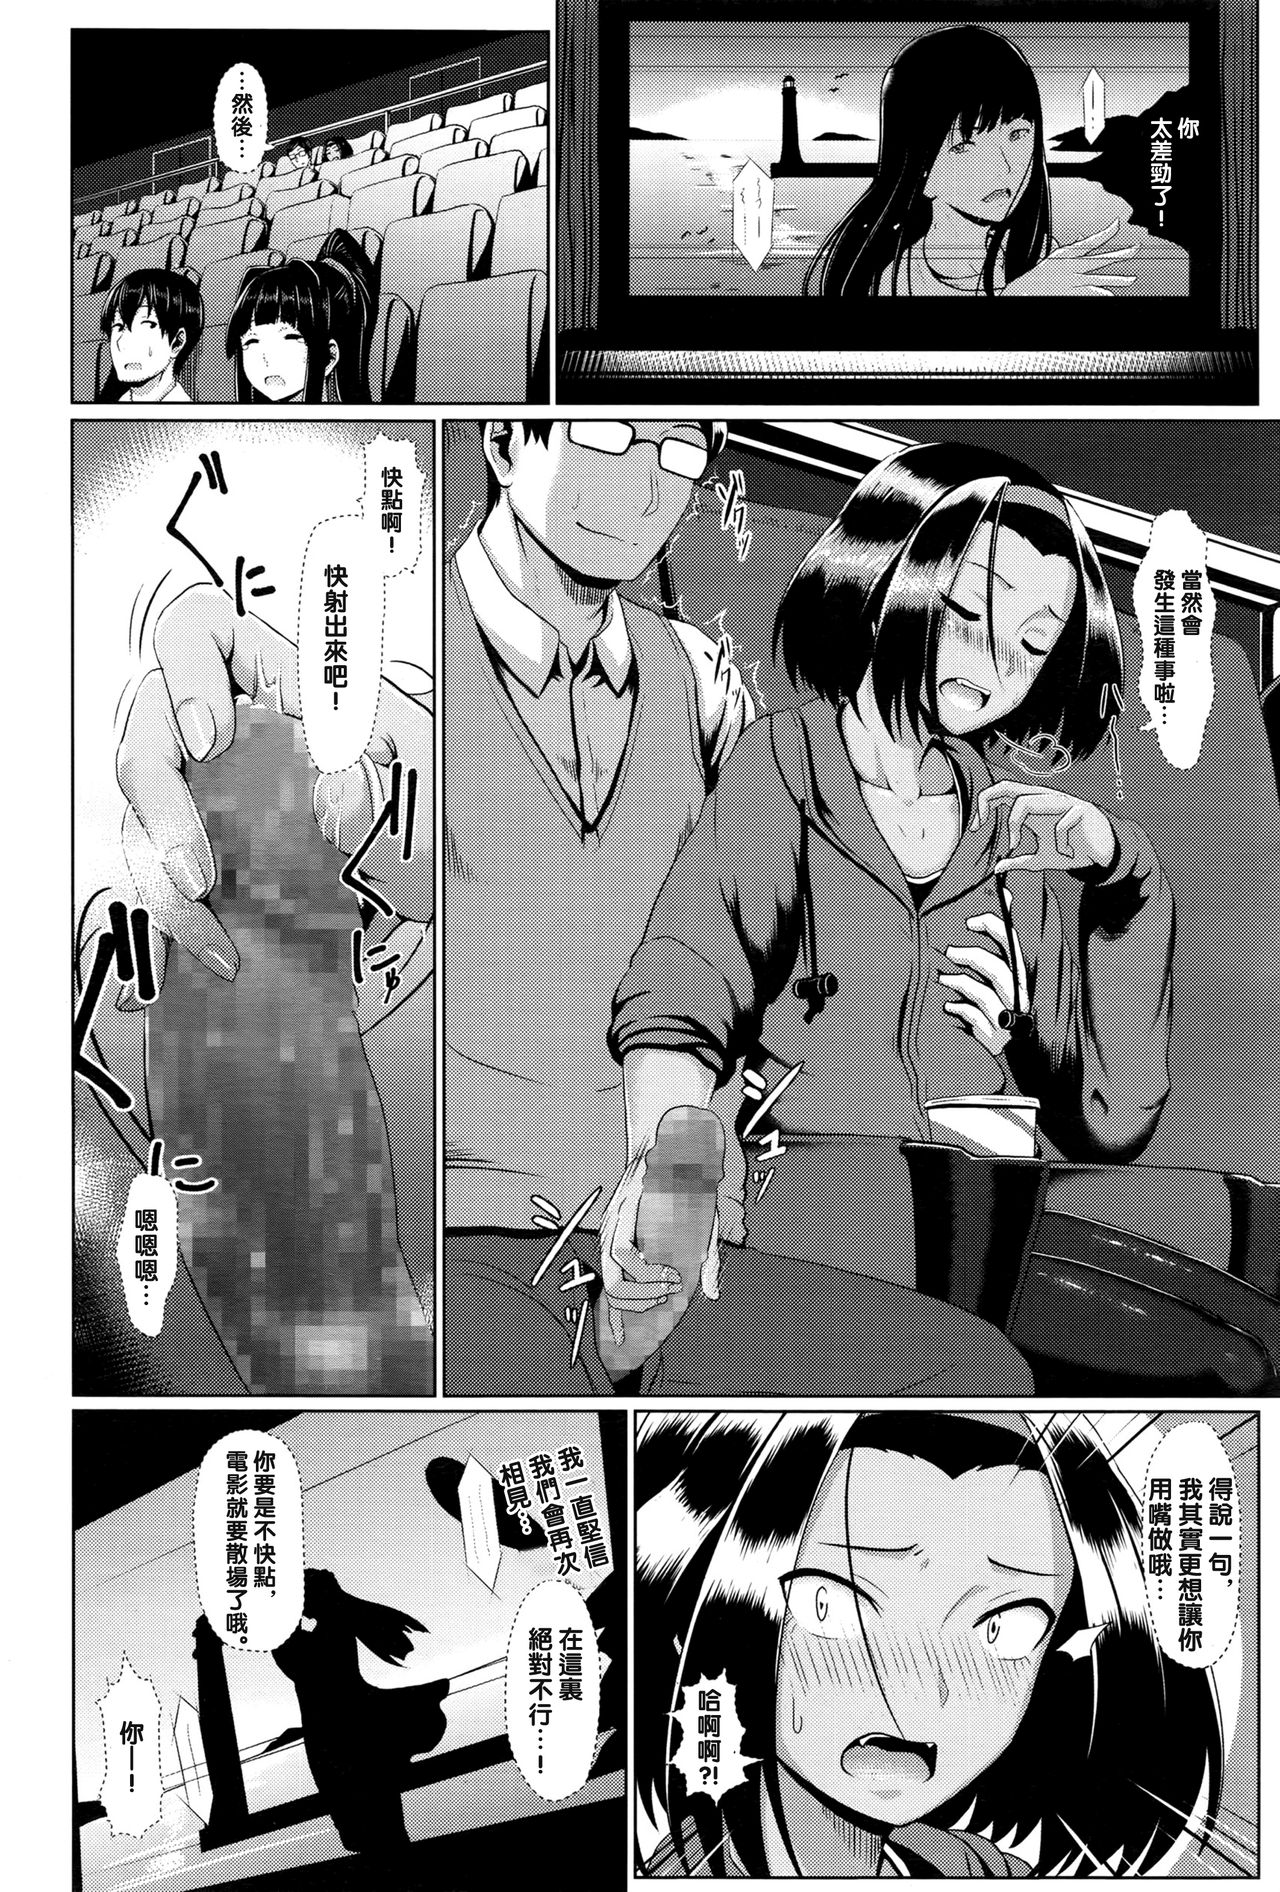 [Shiden Hiro] outframe (COMIC Koh 2016-07) [Chinese] [沒有漢化] [四電ヒロ] outframe (COMIC 高 2016年7月号) [中文翻譯]